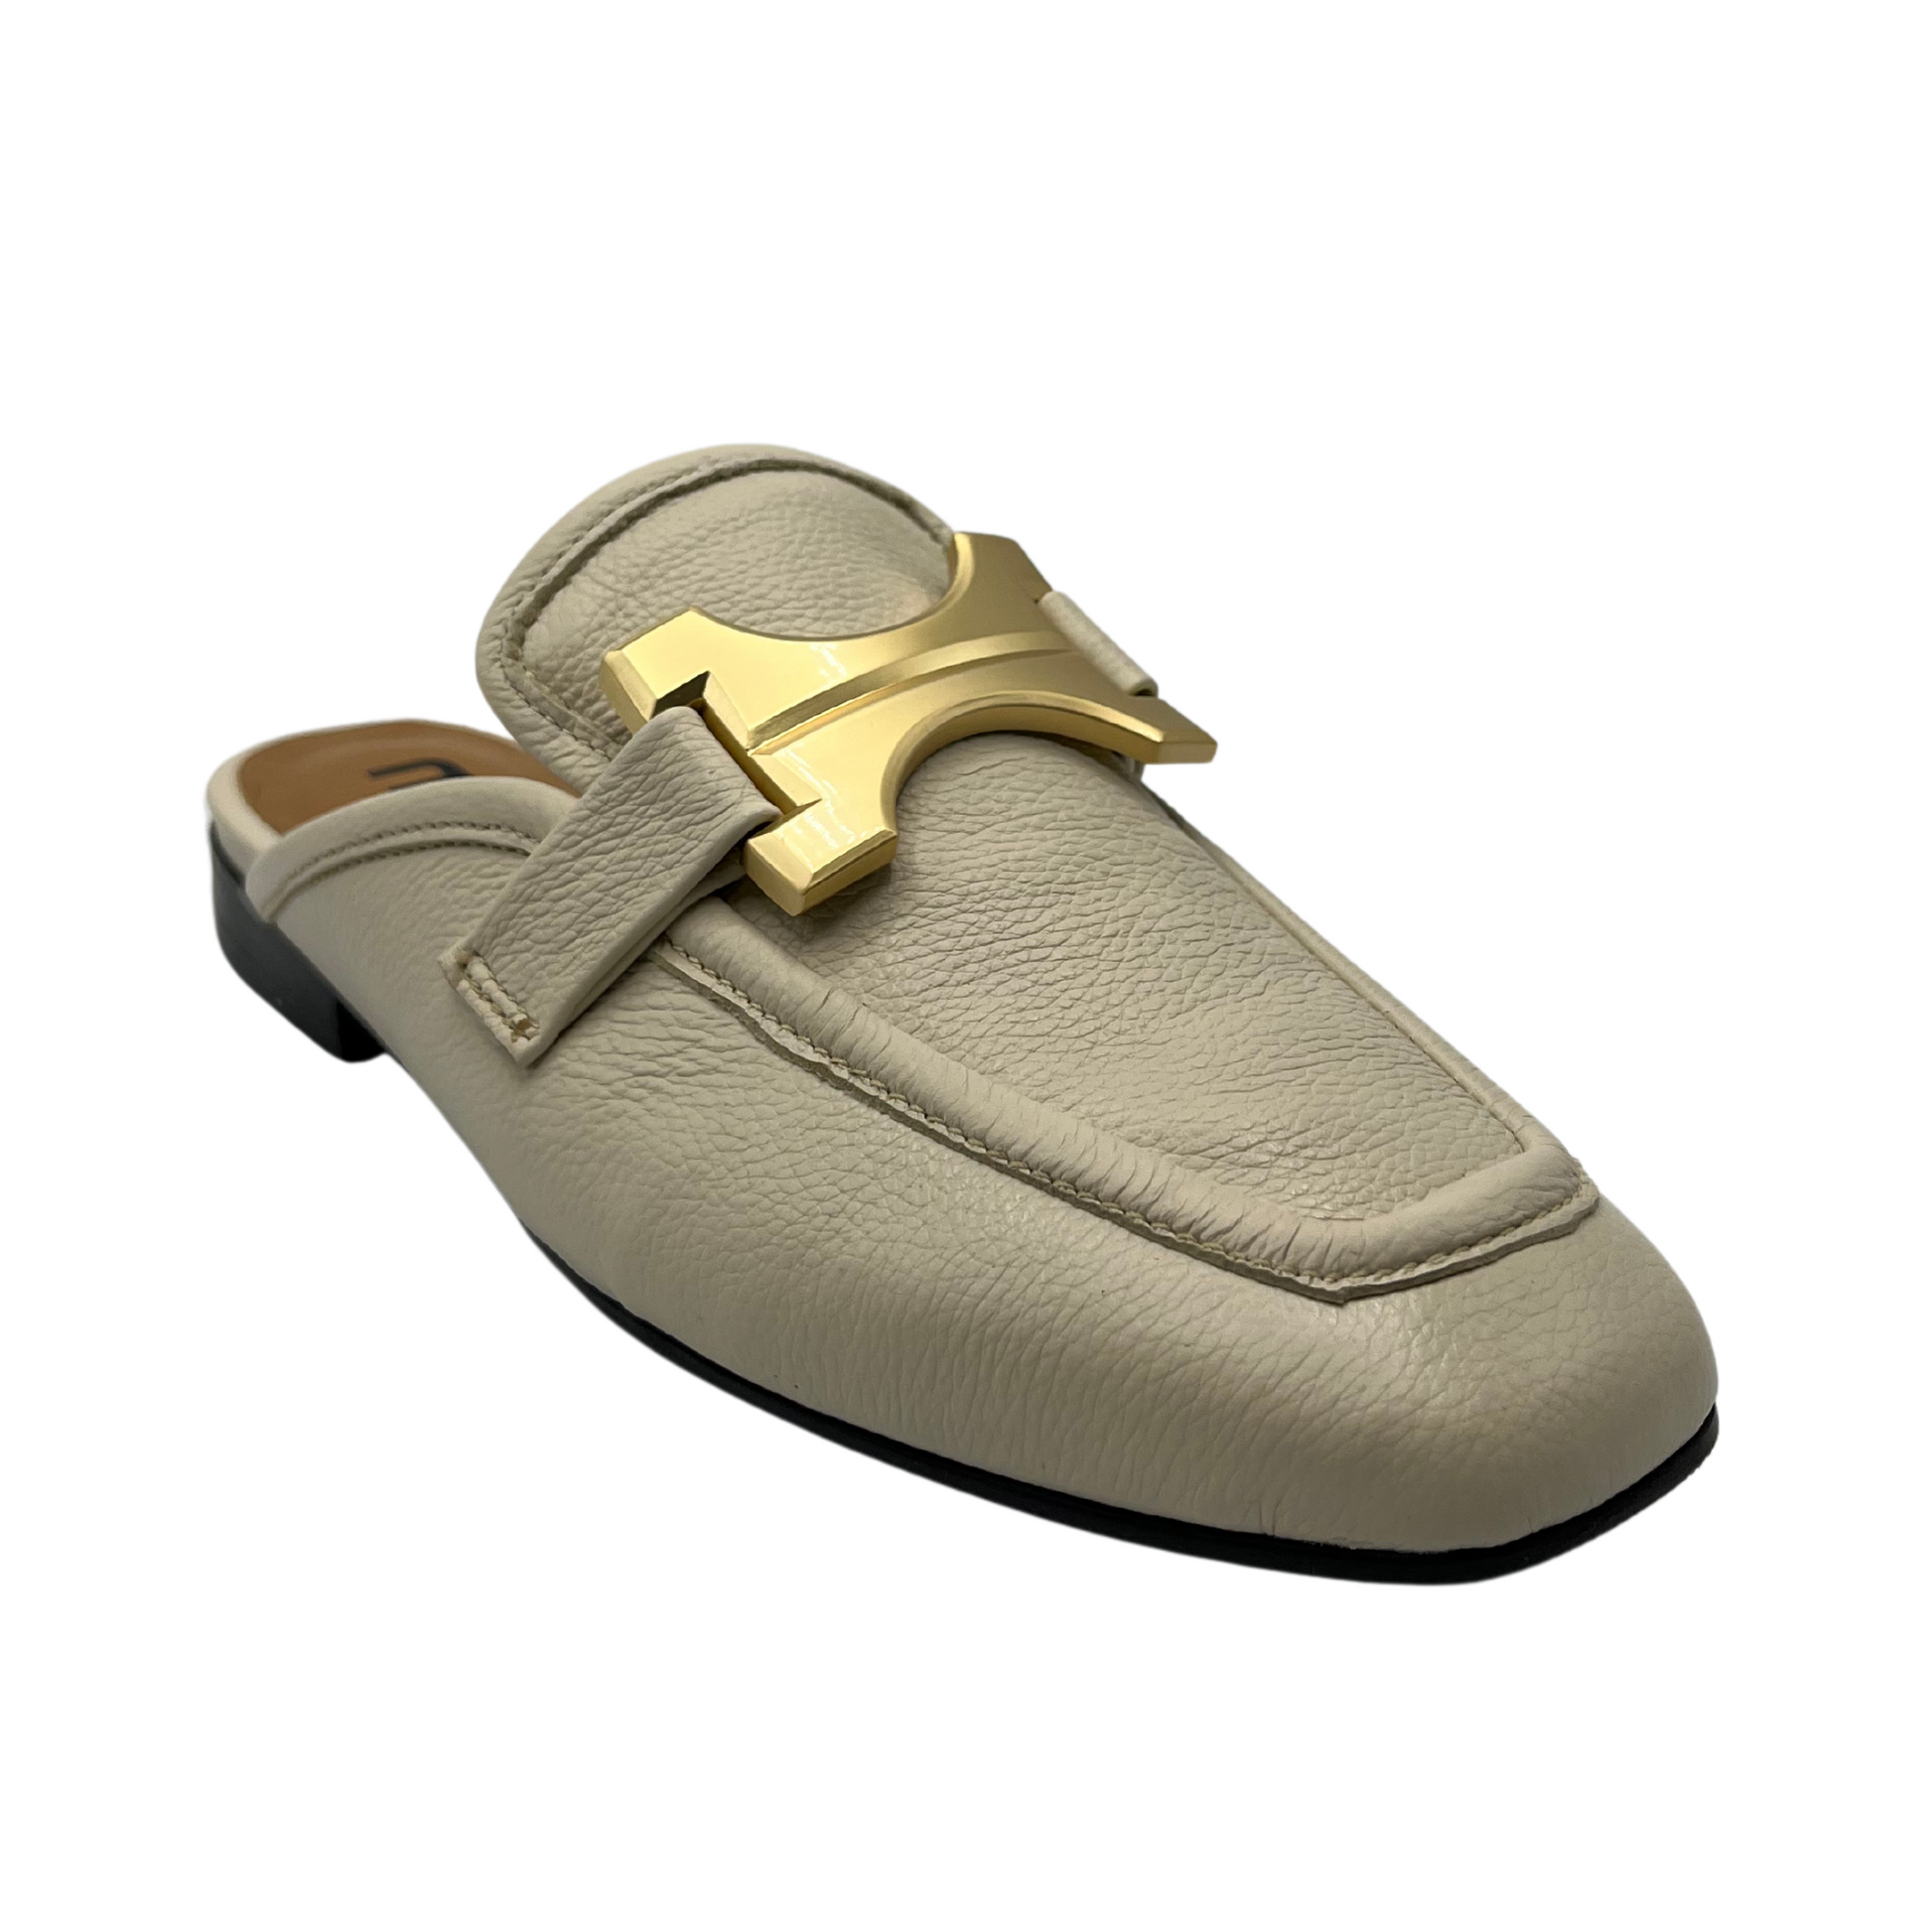 45 degree angled view of latte leather loafer with square toe and gold embellishment